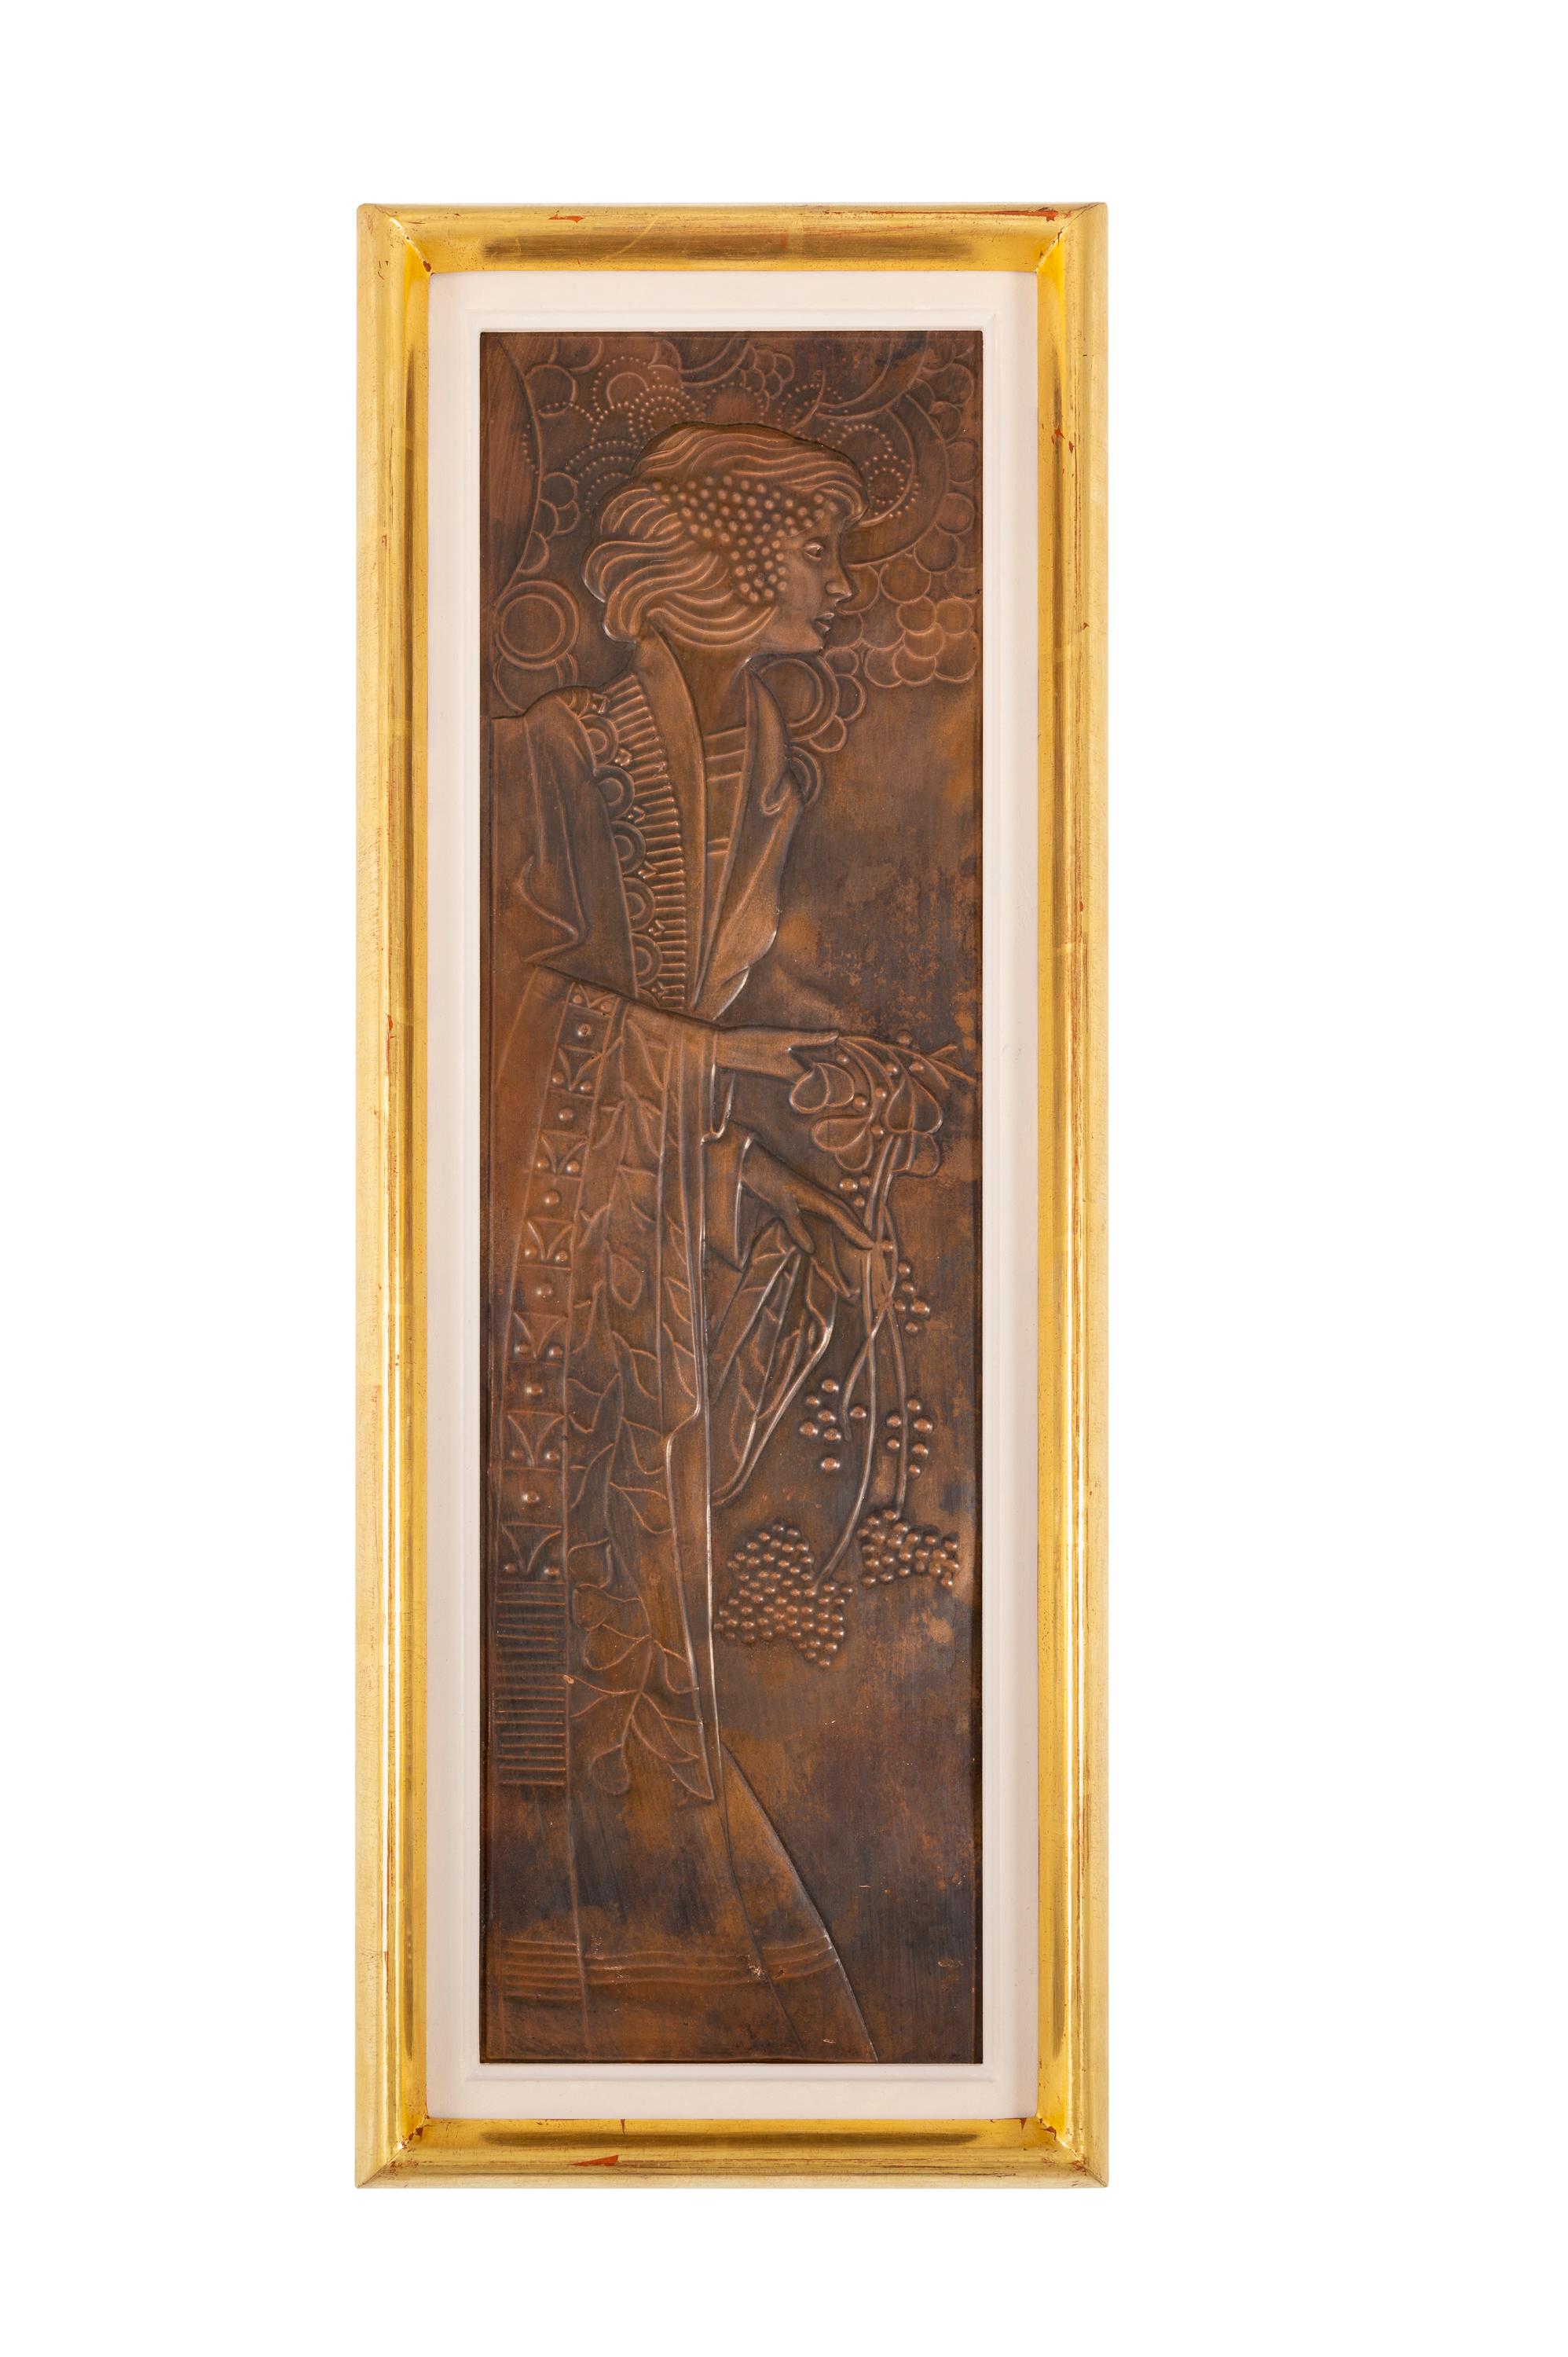 Pair of Reliefs, Dionysus and Demeter, Georg Klimt (1867 - 1931), patinated copper, ca. 1900

Georg Klimt's excellent craftsmanship in metal sculpting was acknowledged and valued by his contemporaries, first and foremost by his older brother Gustav